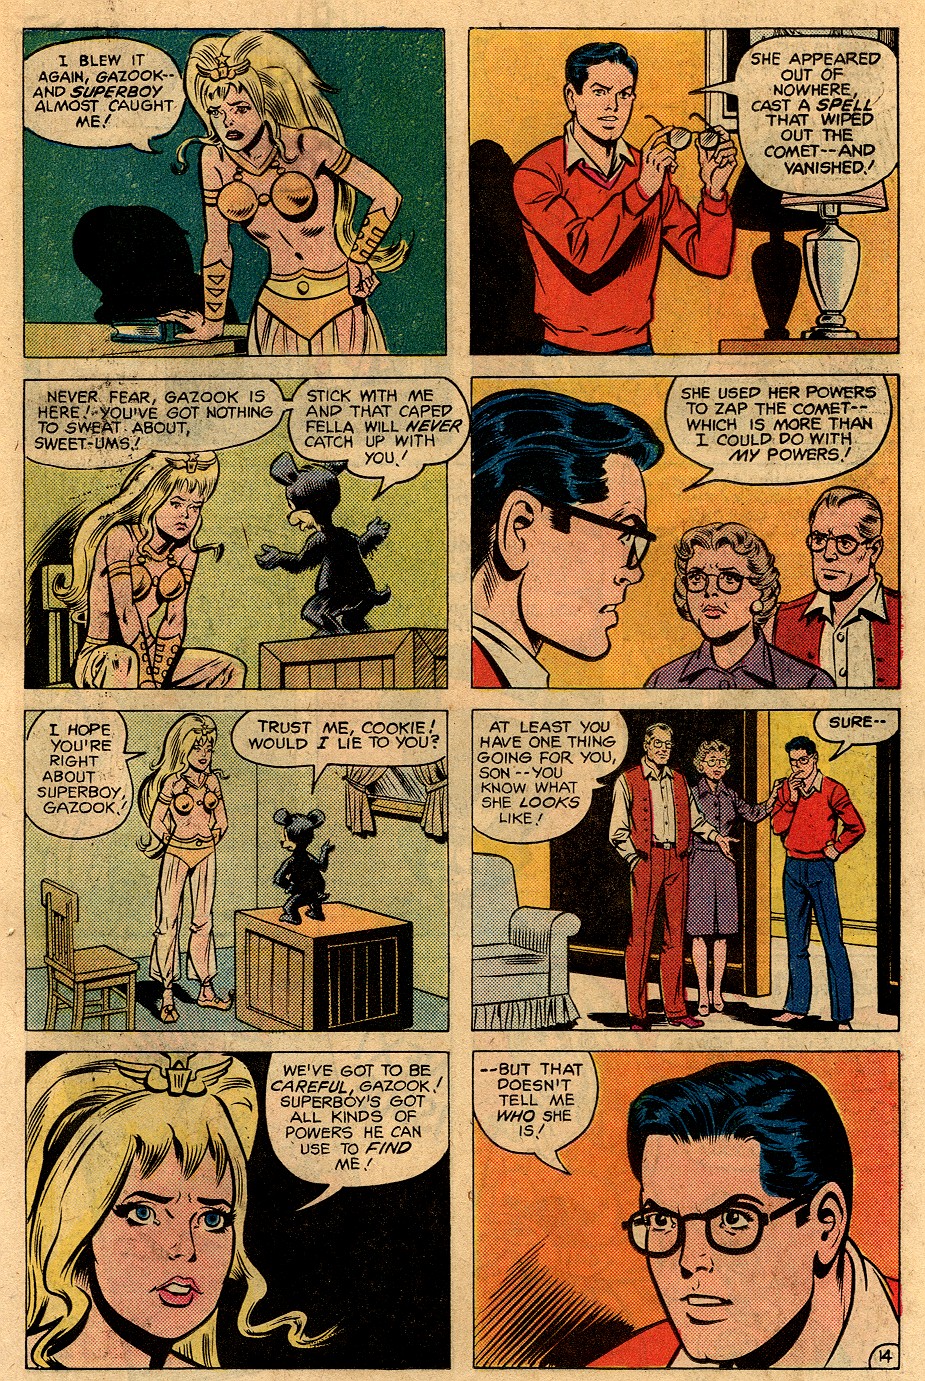 The New Adventures of Superboy 34 Page 18